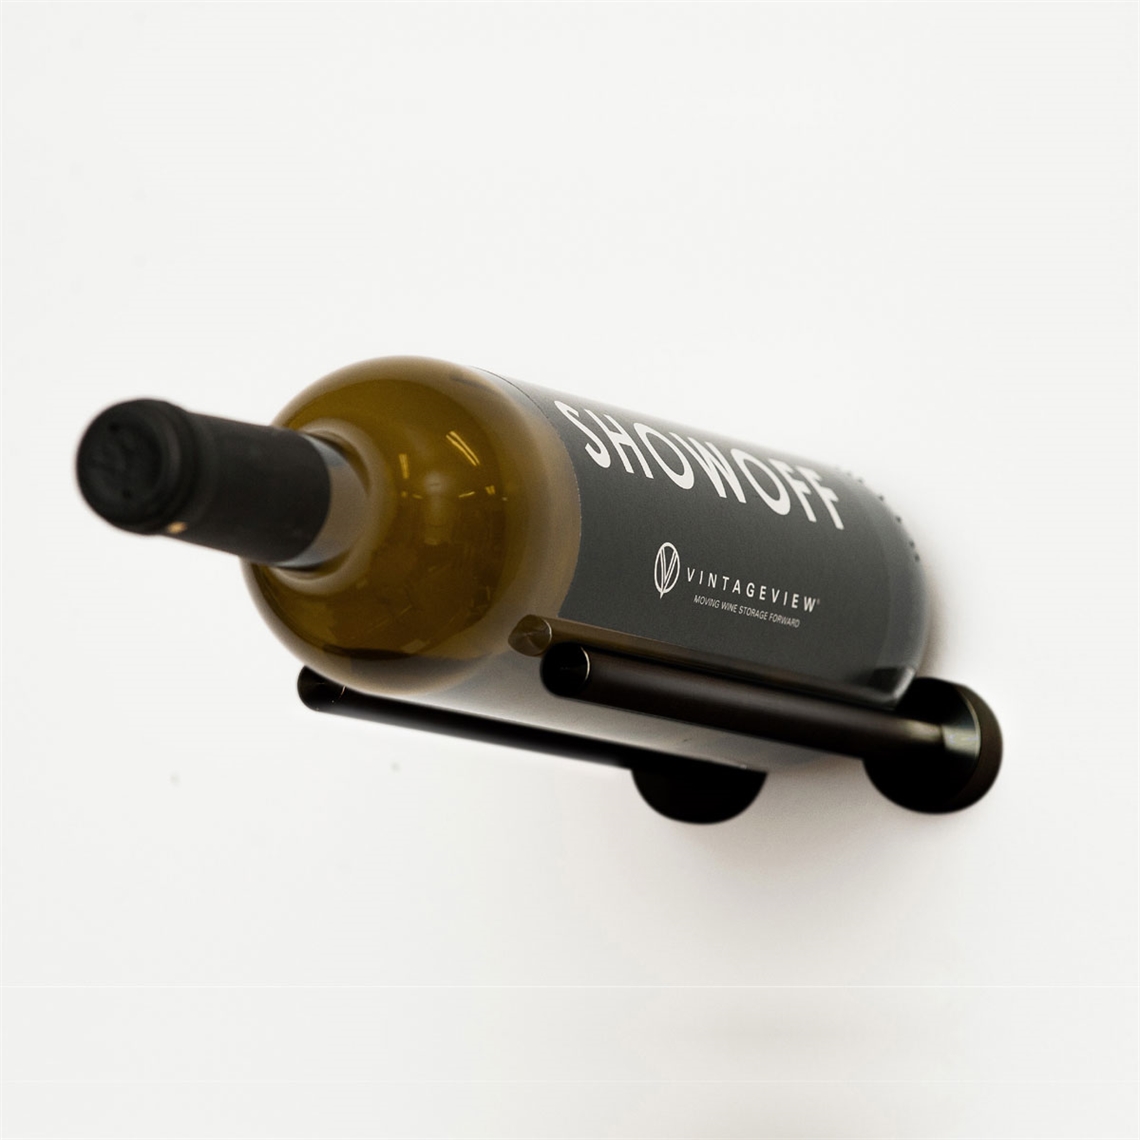 View more wall mounted wine racks from our Wall Mounted Wine Racks range